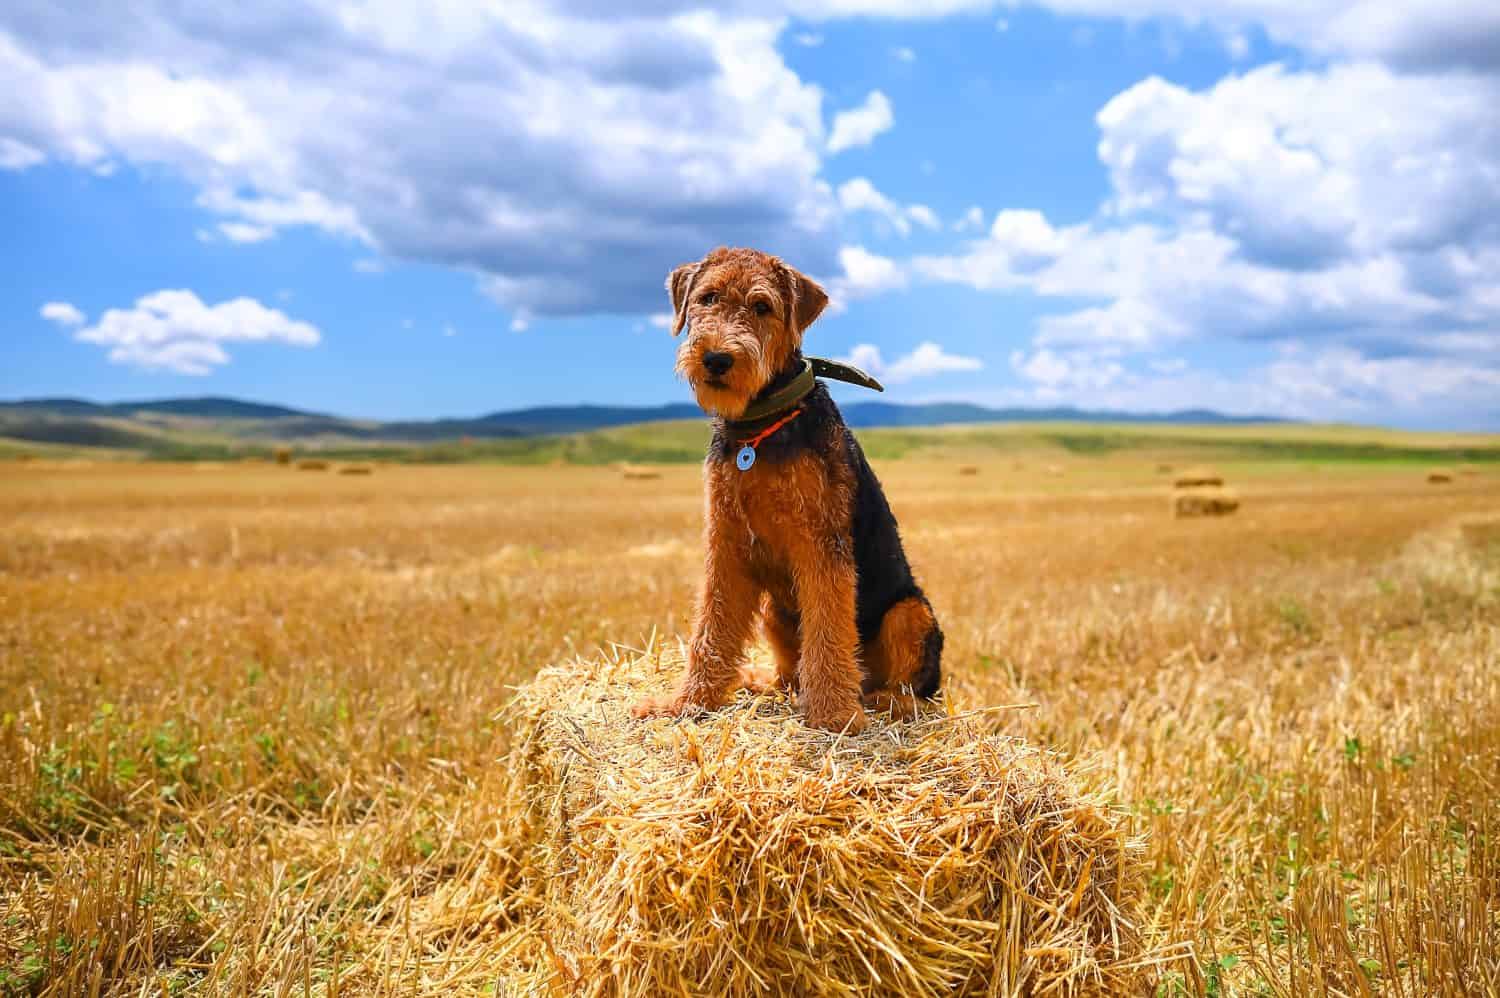 An Airedale terrier puppy sits in a field on a haystack.